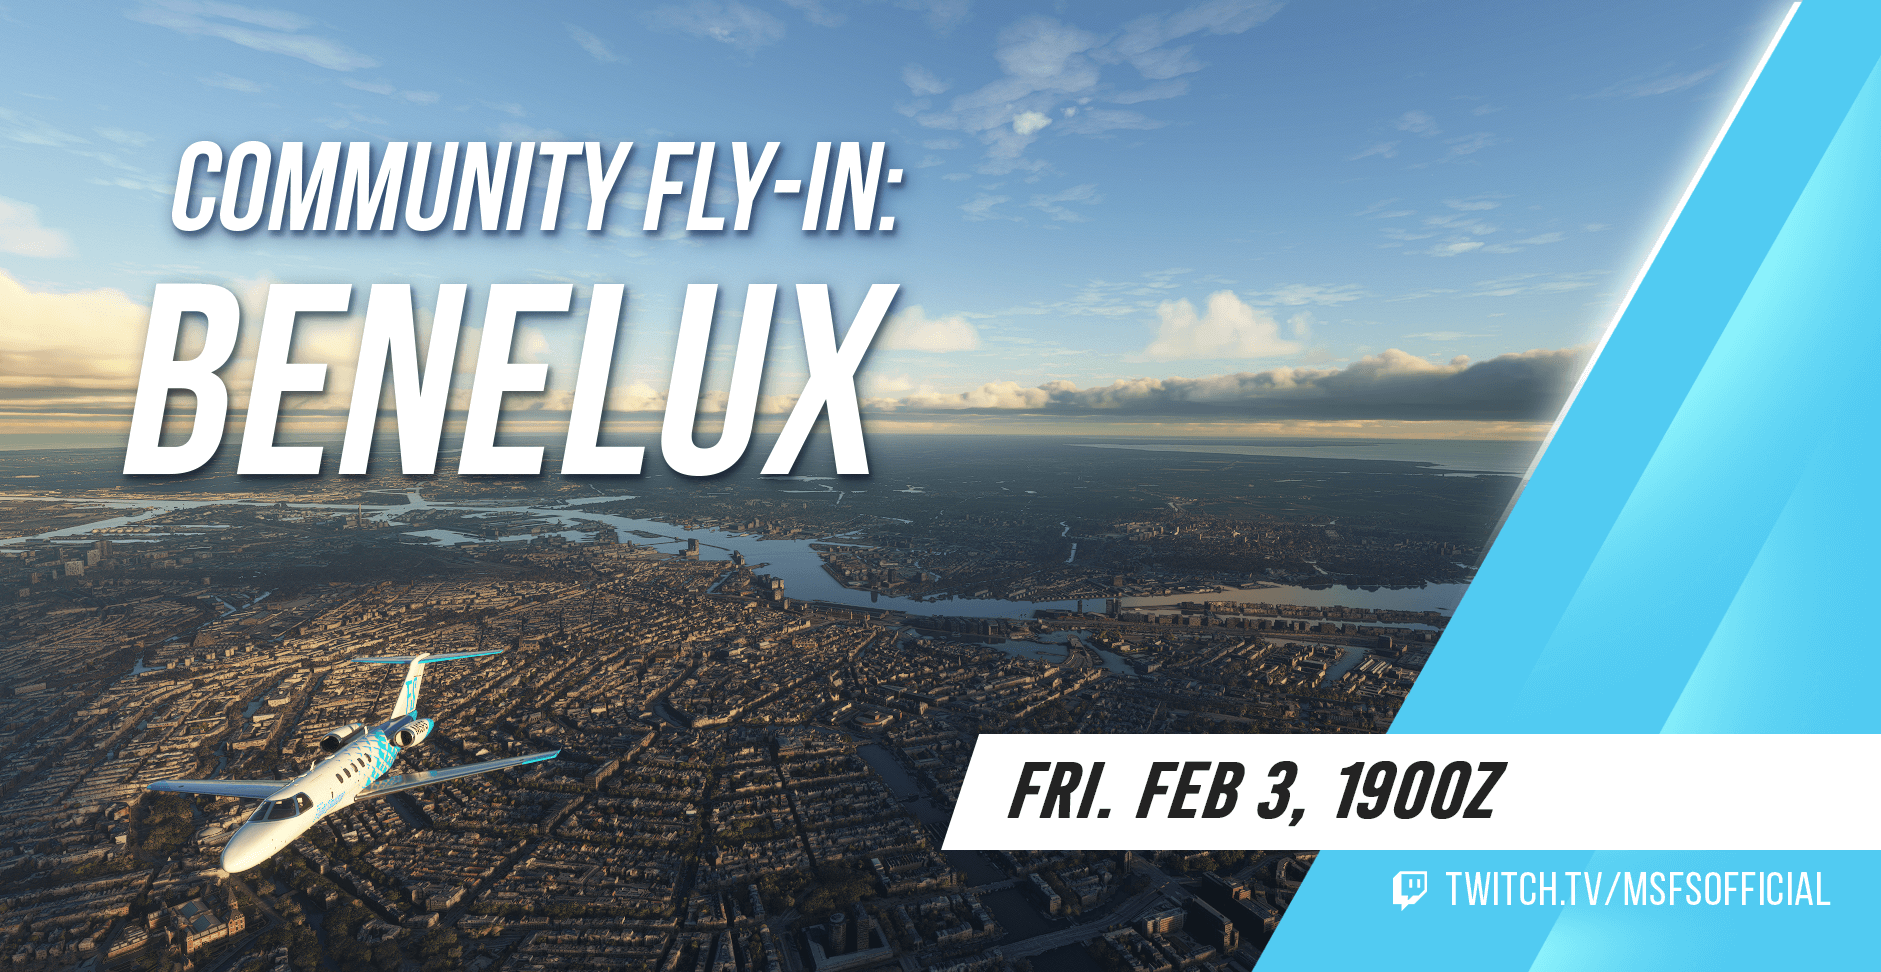 A Cessna Citation CJ4 flies over the city of Amsterdam. Community Fly-In: Benelux. Friday February 3rd at 1900Z. Watch at twitch.tv/msfsofficial